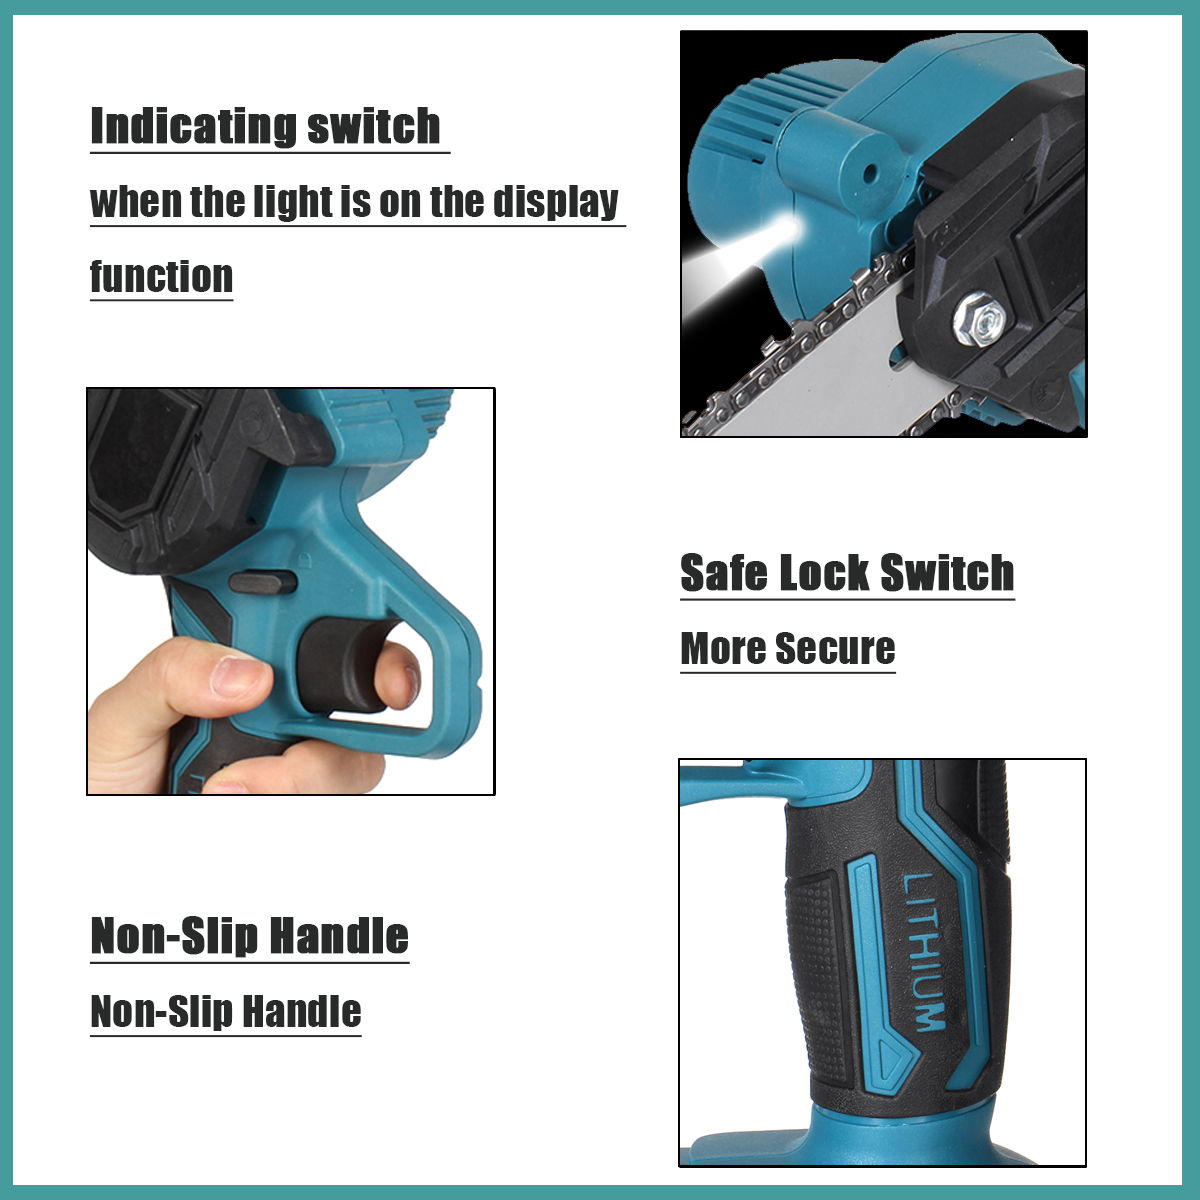 6-Inch-Mini-Cordless-Electric-Chainsaw-Woodworking-Wood-Cutter-Rechargeable-Portable-Chain-Saw-W-Non-1863317-15